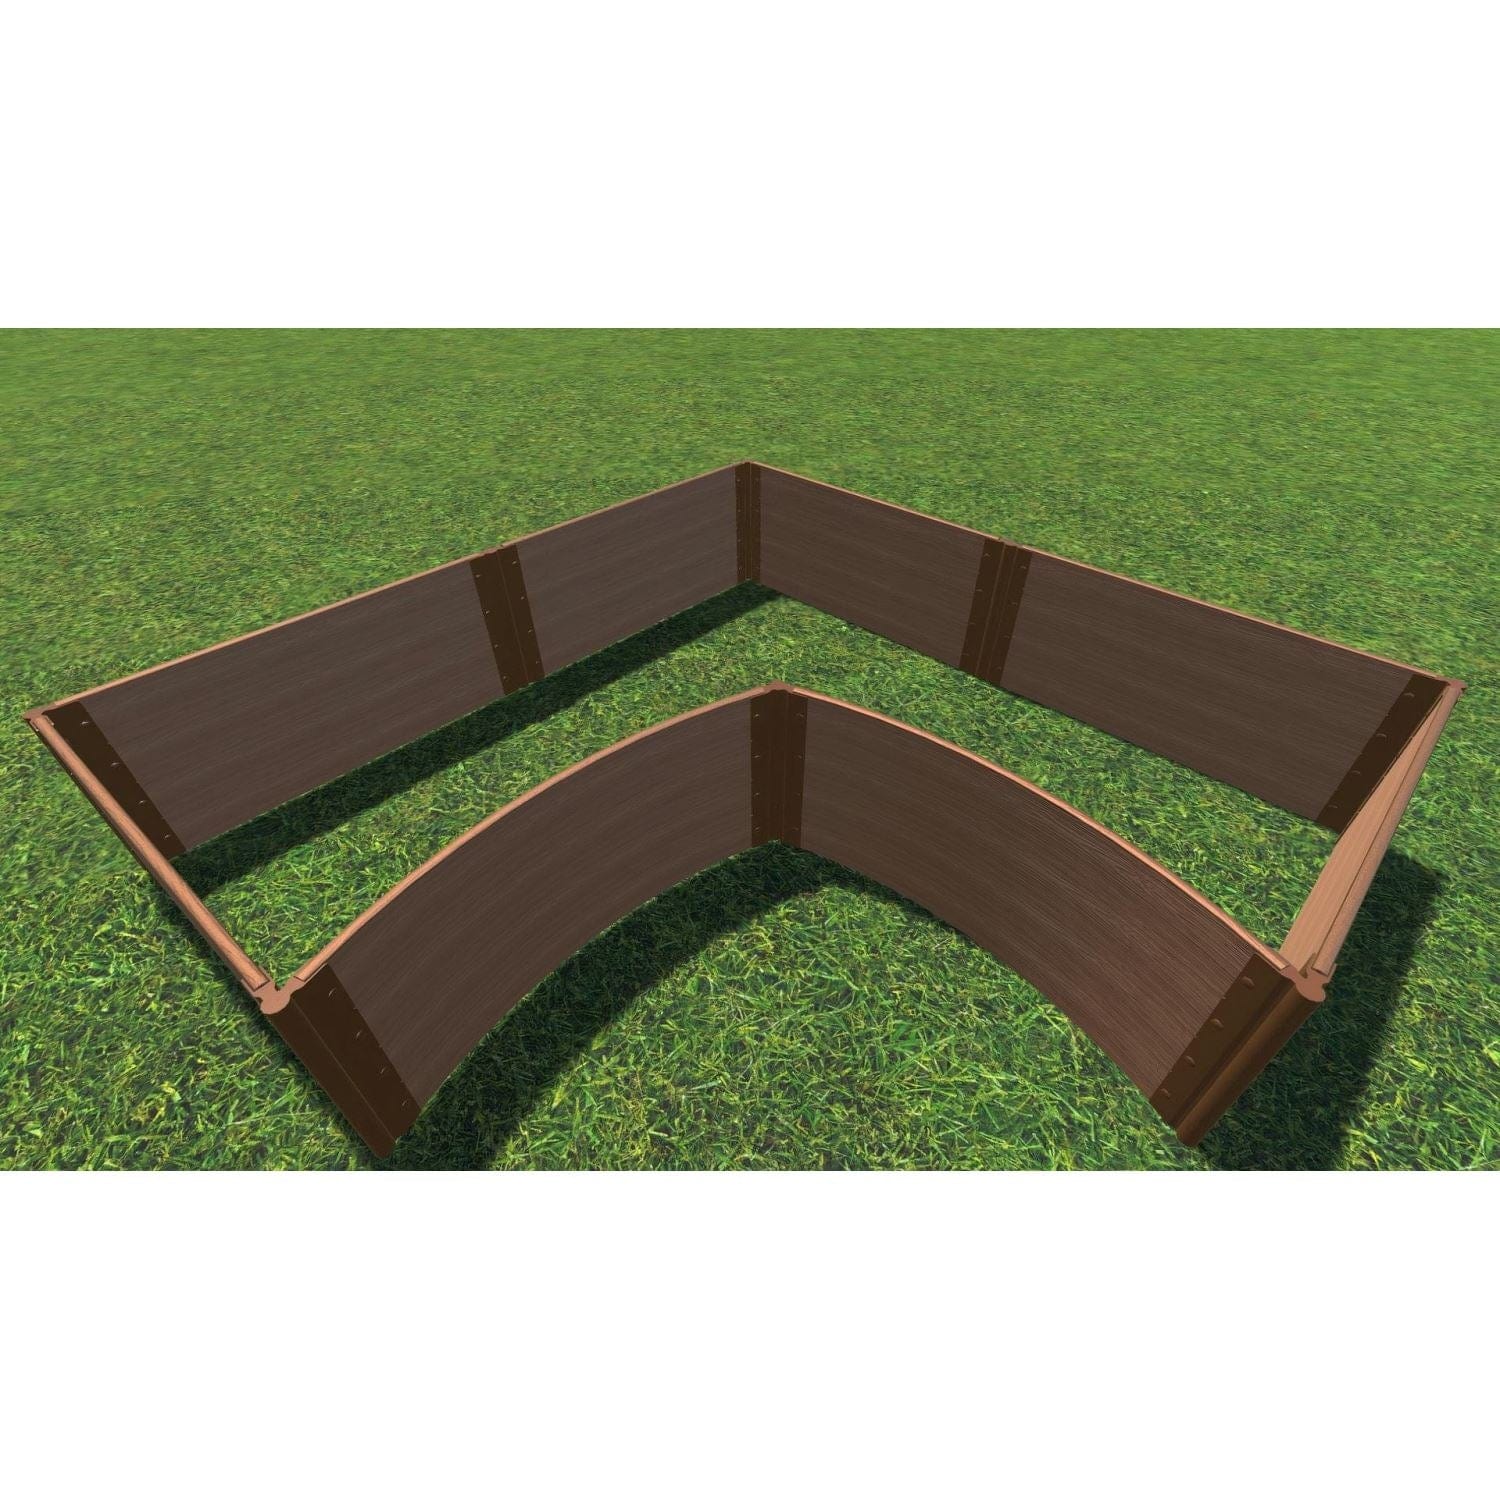 Frame It All Gardening Accessories 2" Frame It All | Tool-Free Grand Concourse Interior Curved Corner Raised Garden Bed 8' X 8' X 22" - Classic Sienna 800004029